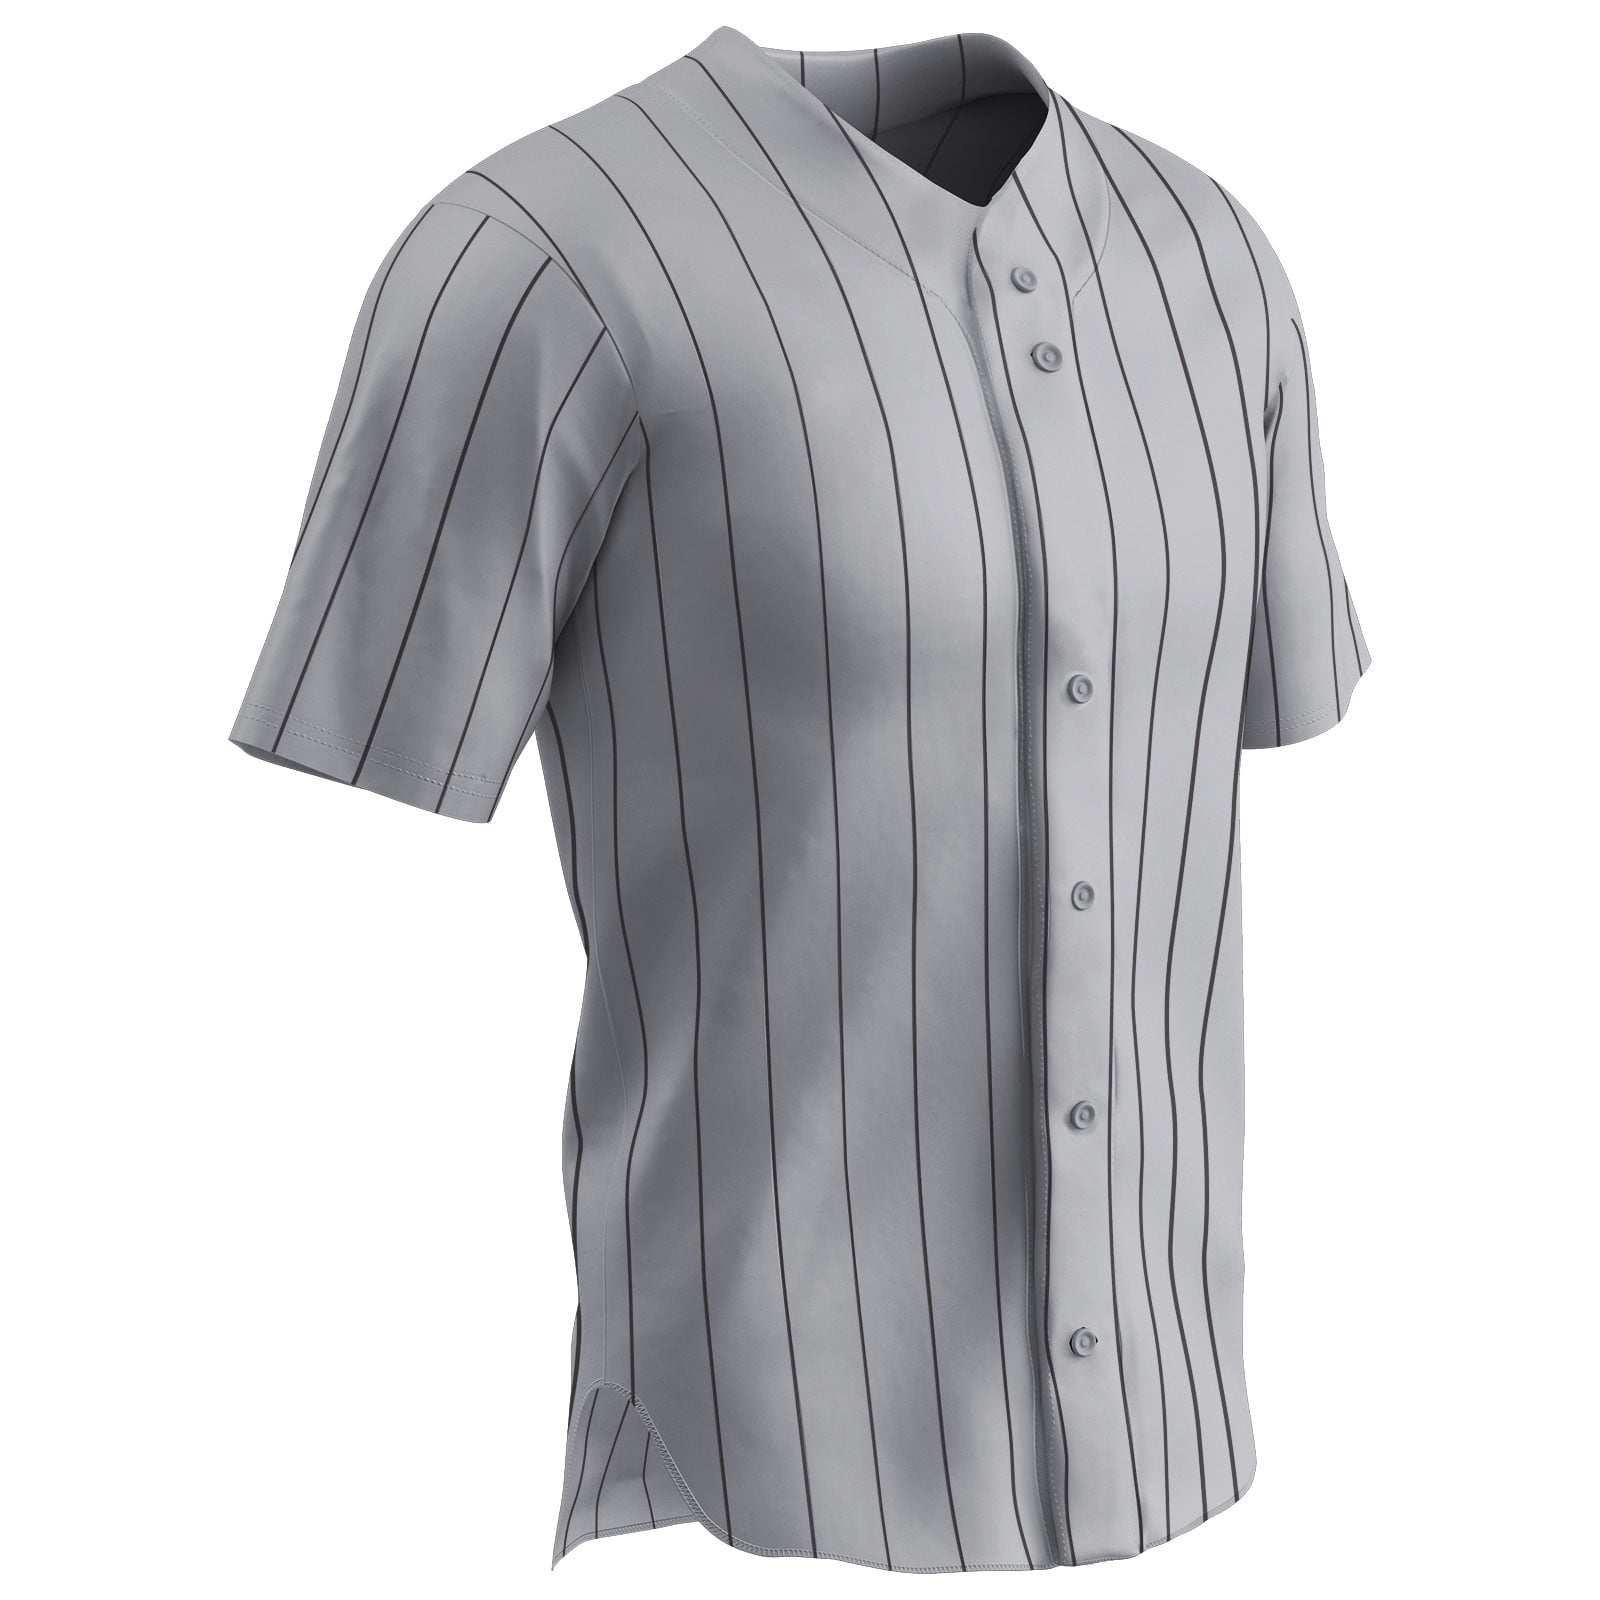 CHAMPRO Ace Polyester Button Front Baseball Jersey Youth X-Large Grey